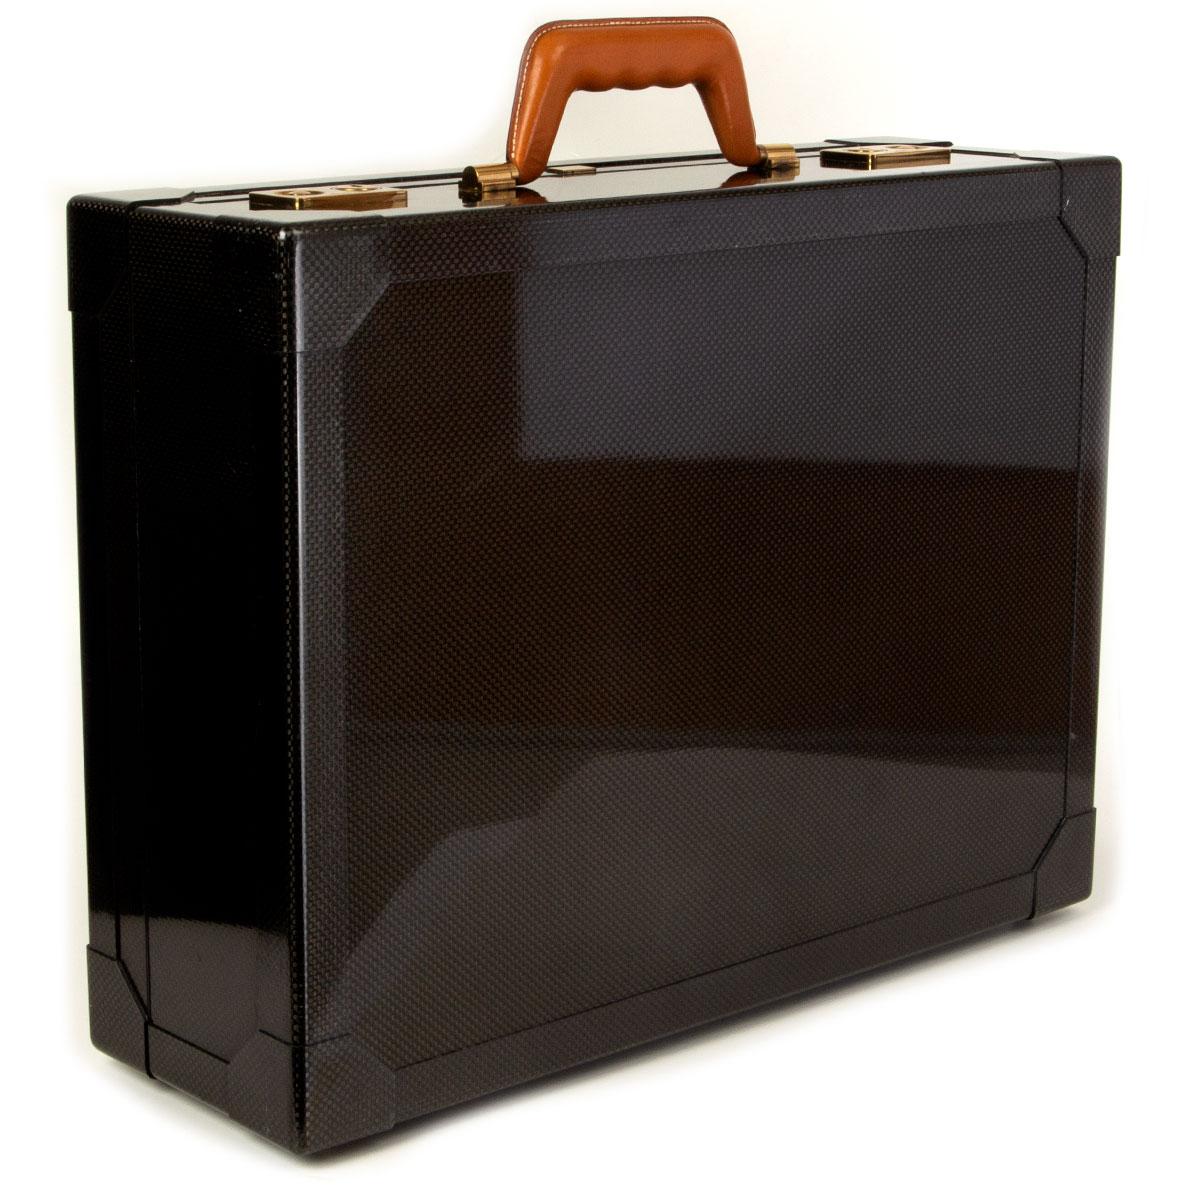 100% authentic Hermès 'Espaces 48' briefcase in anthracite carbon fiber with a Vache Naturelle leather handle featuring gold-plated hardware. Limited edition from the late 1980's, number 360/500. Lined in light brown leather with a pocket in the lid